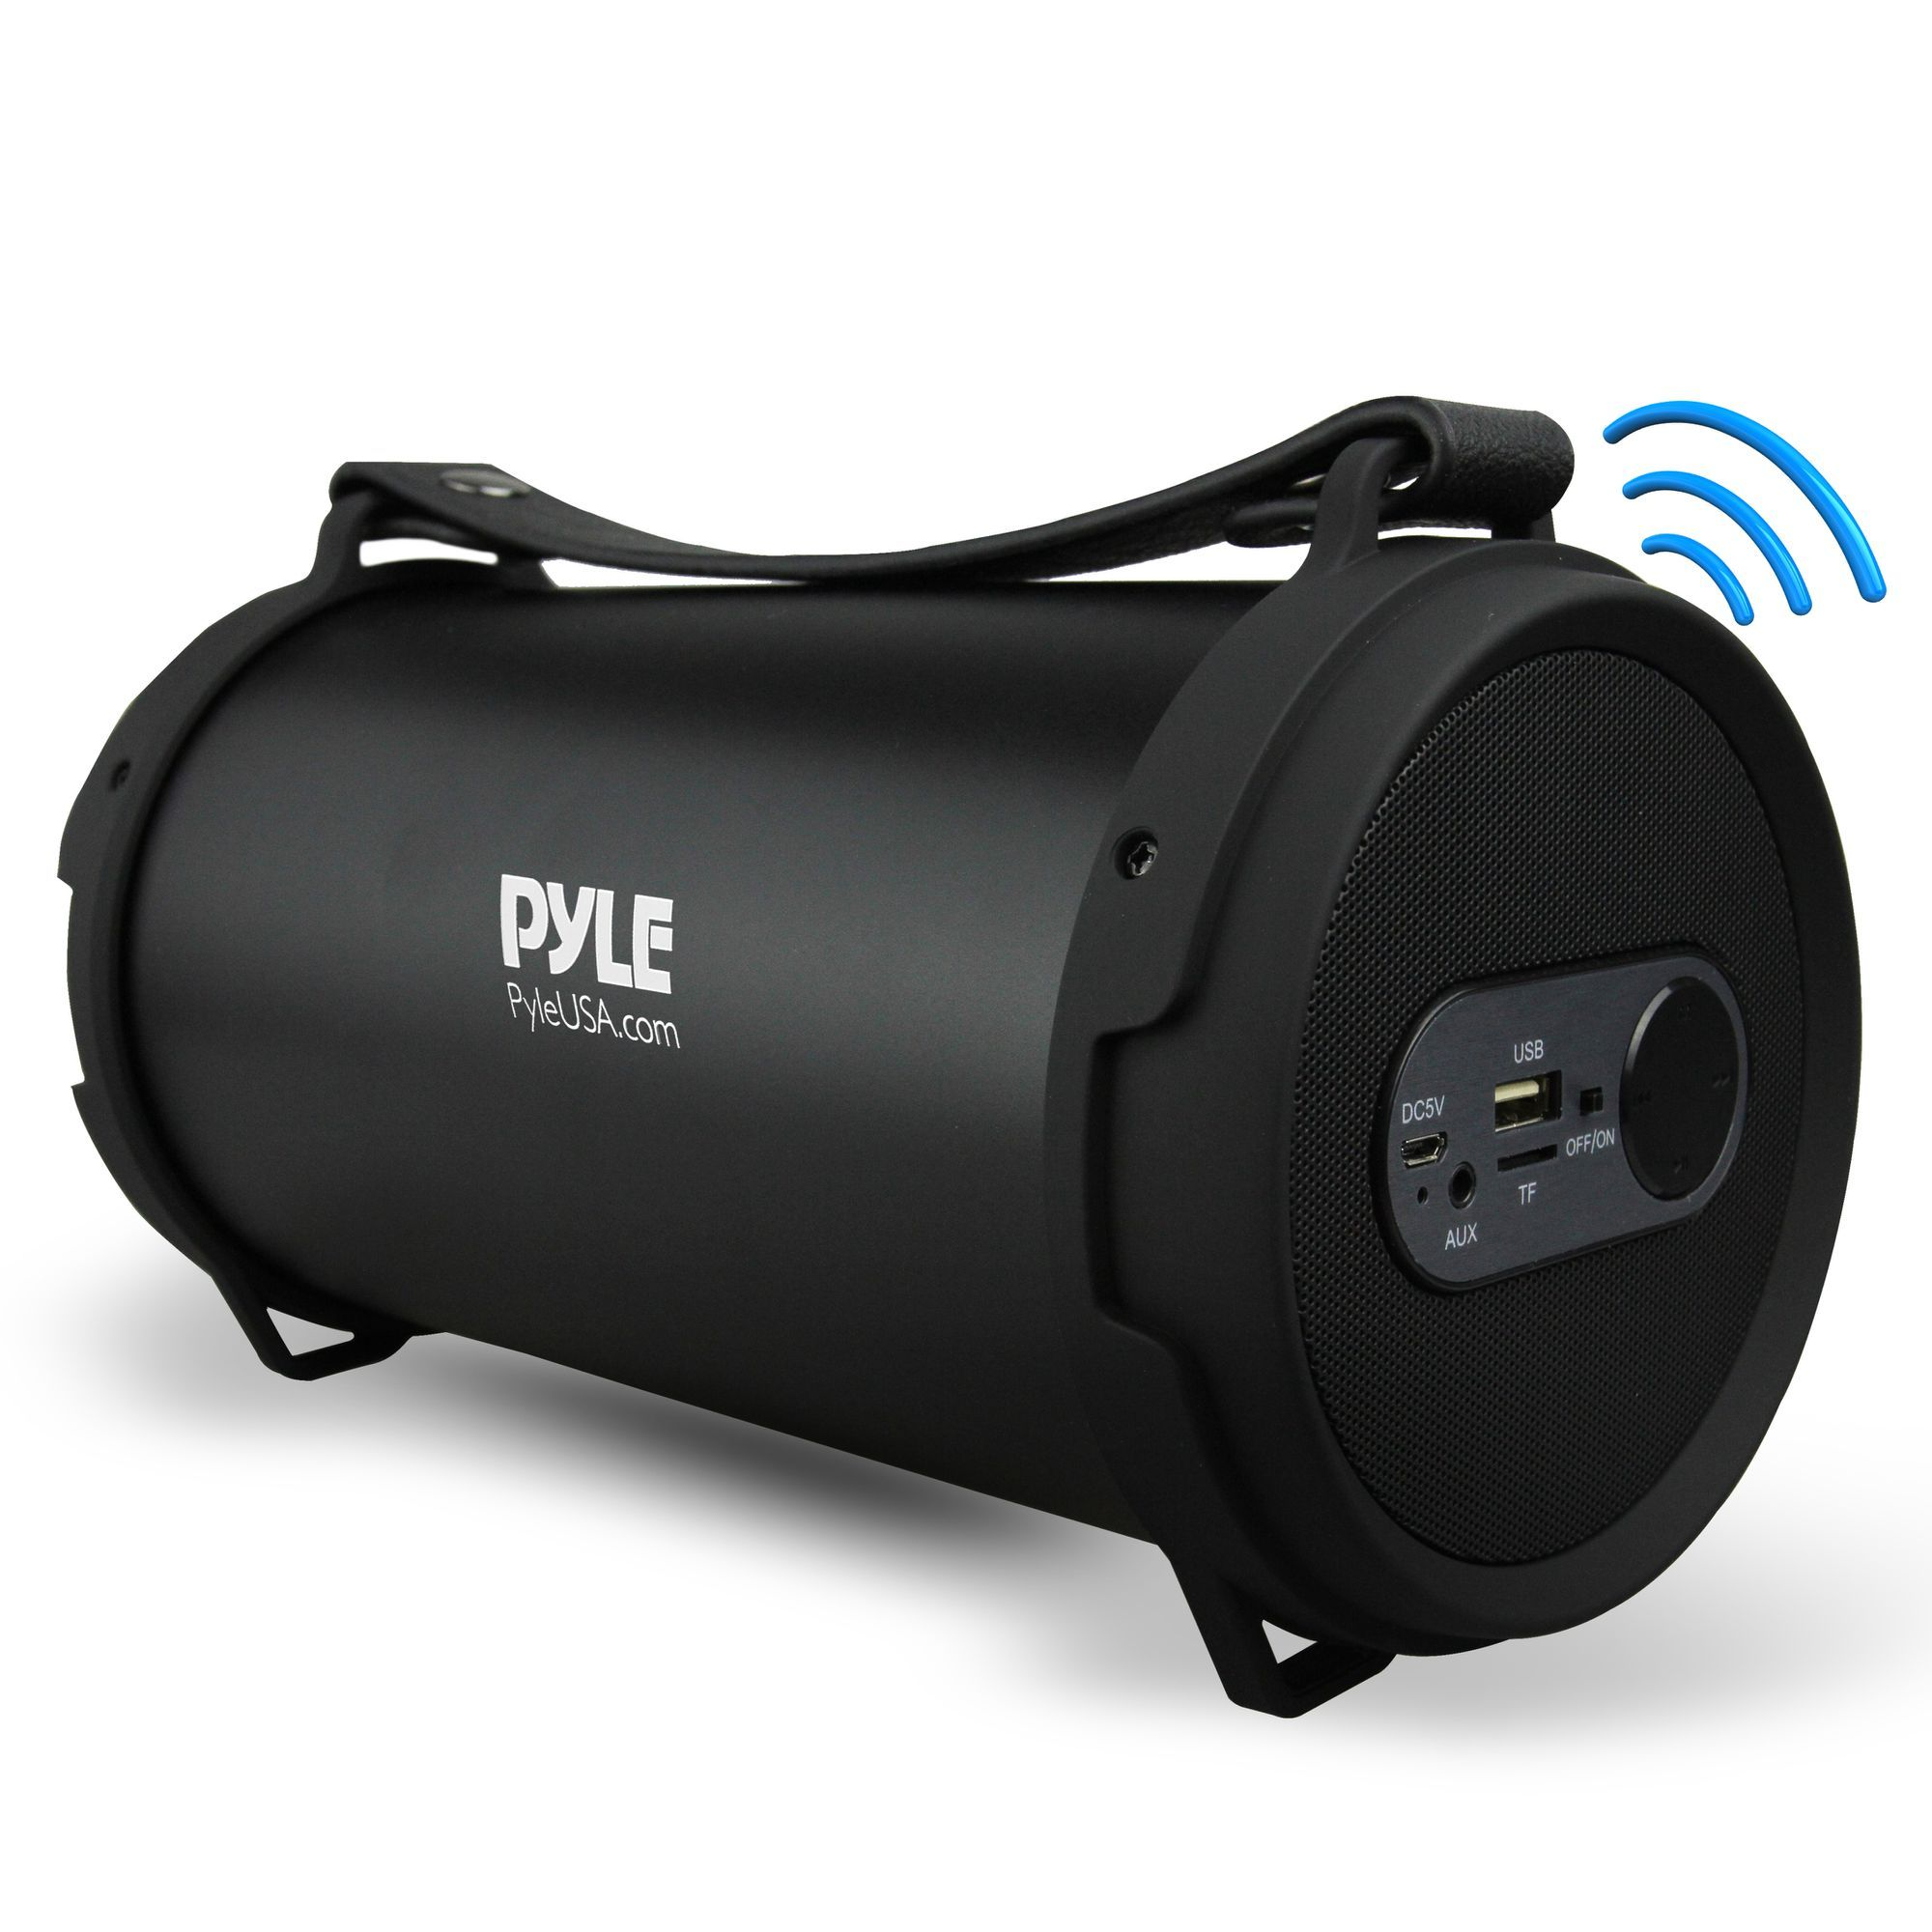 Pyle Portable Speaker, Boombox, Bluetooth Speakers, Rechargeable Battery, Surround Sound, Digital Sound Amplifier, USB/SD/FM Radio, Wireless Hi-Fi Active Stereo Speaker System in Black (PBMSPG7)